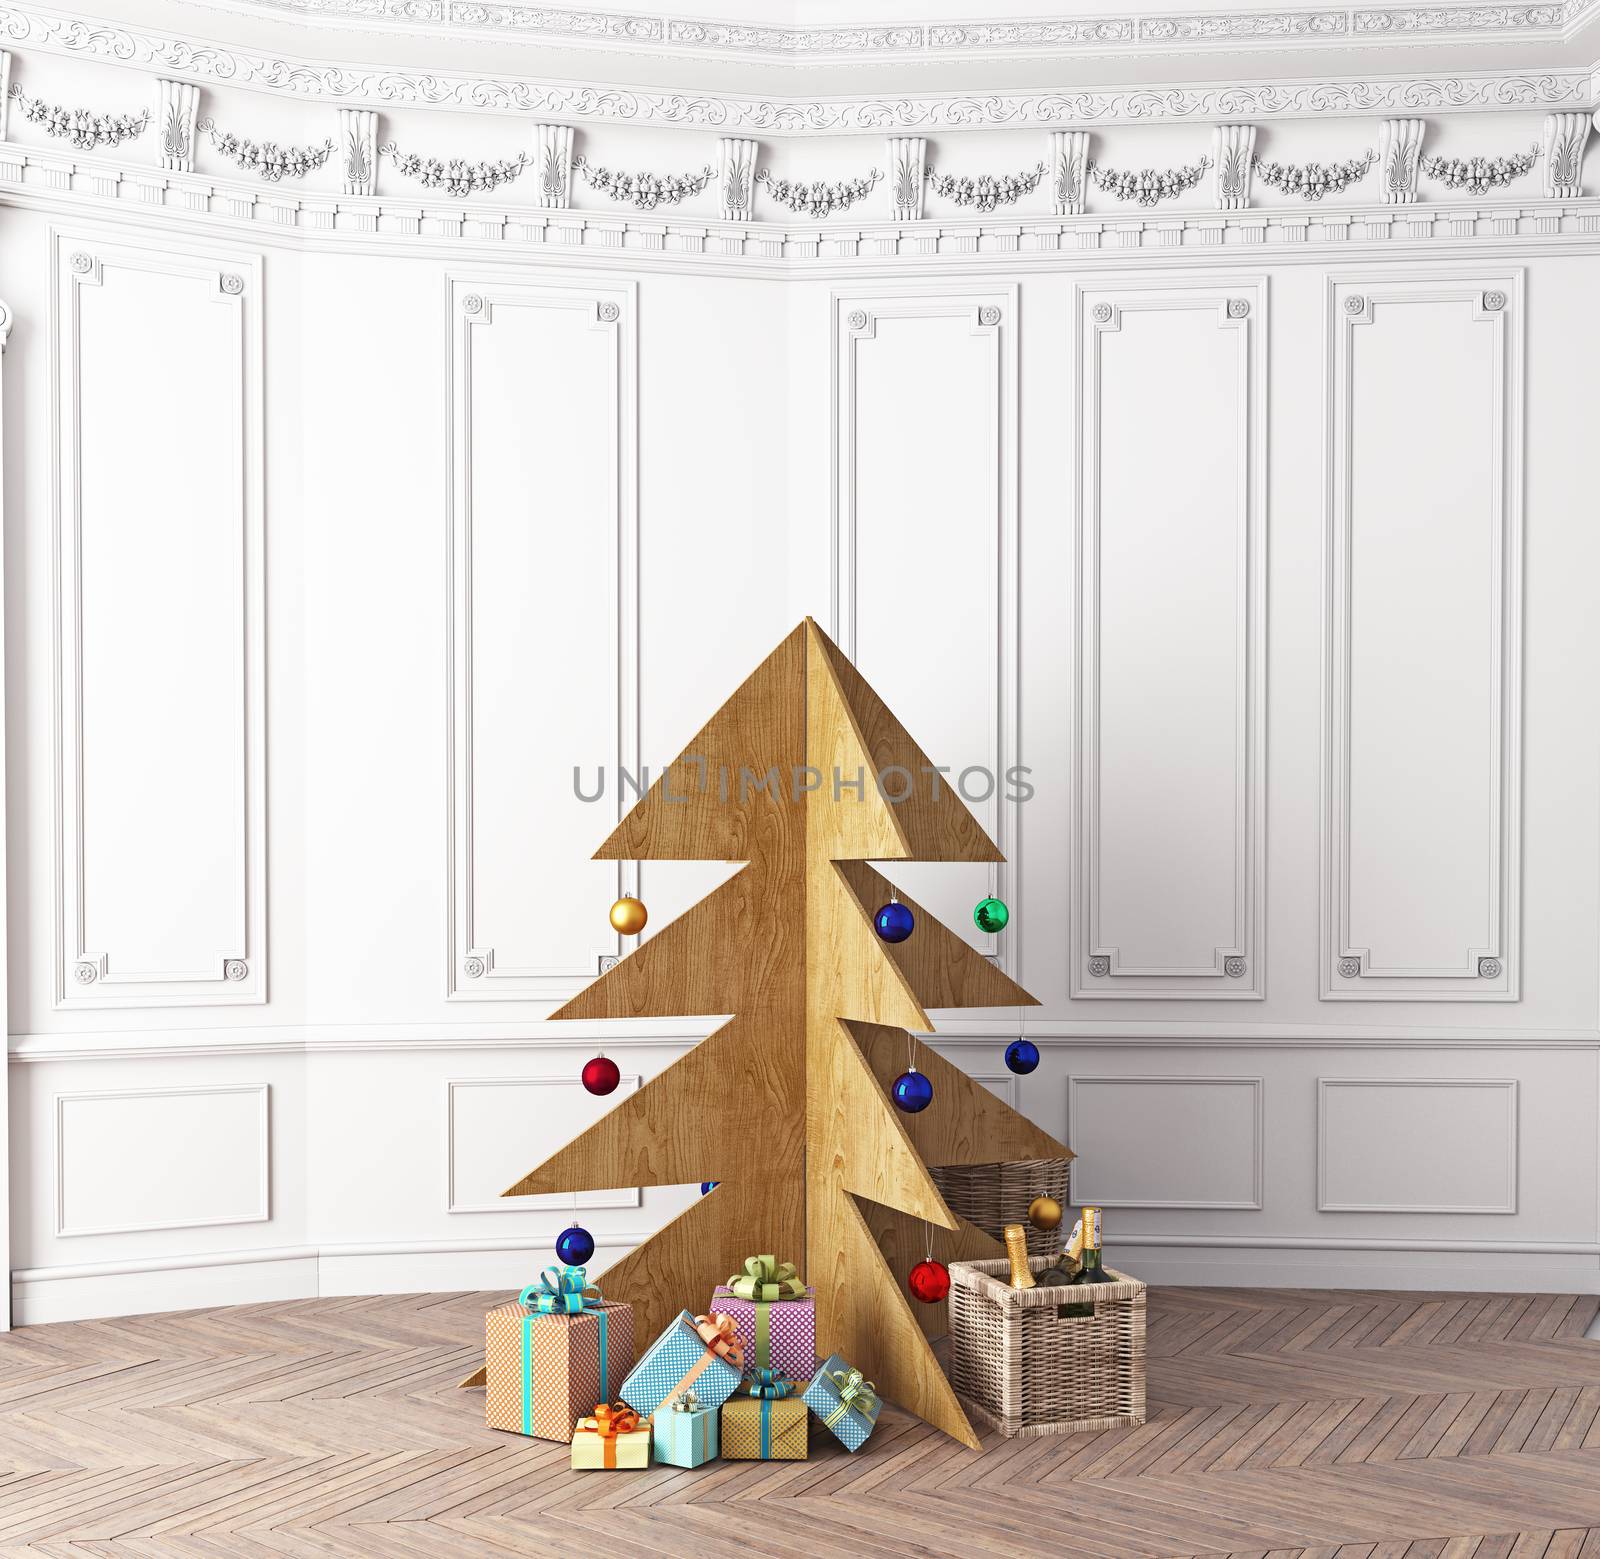 Plywood Christmas tree by vicnt